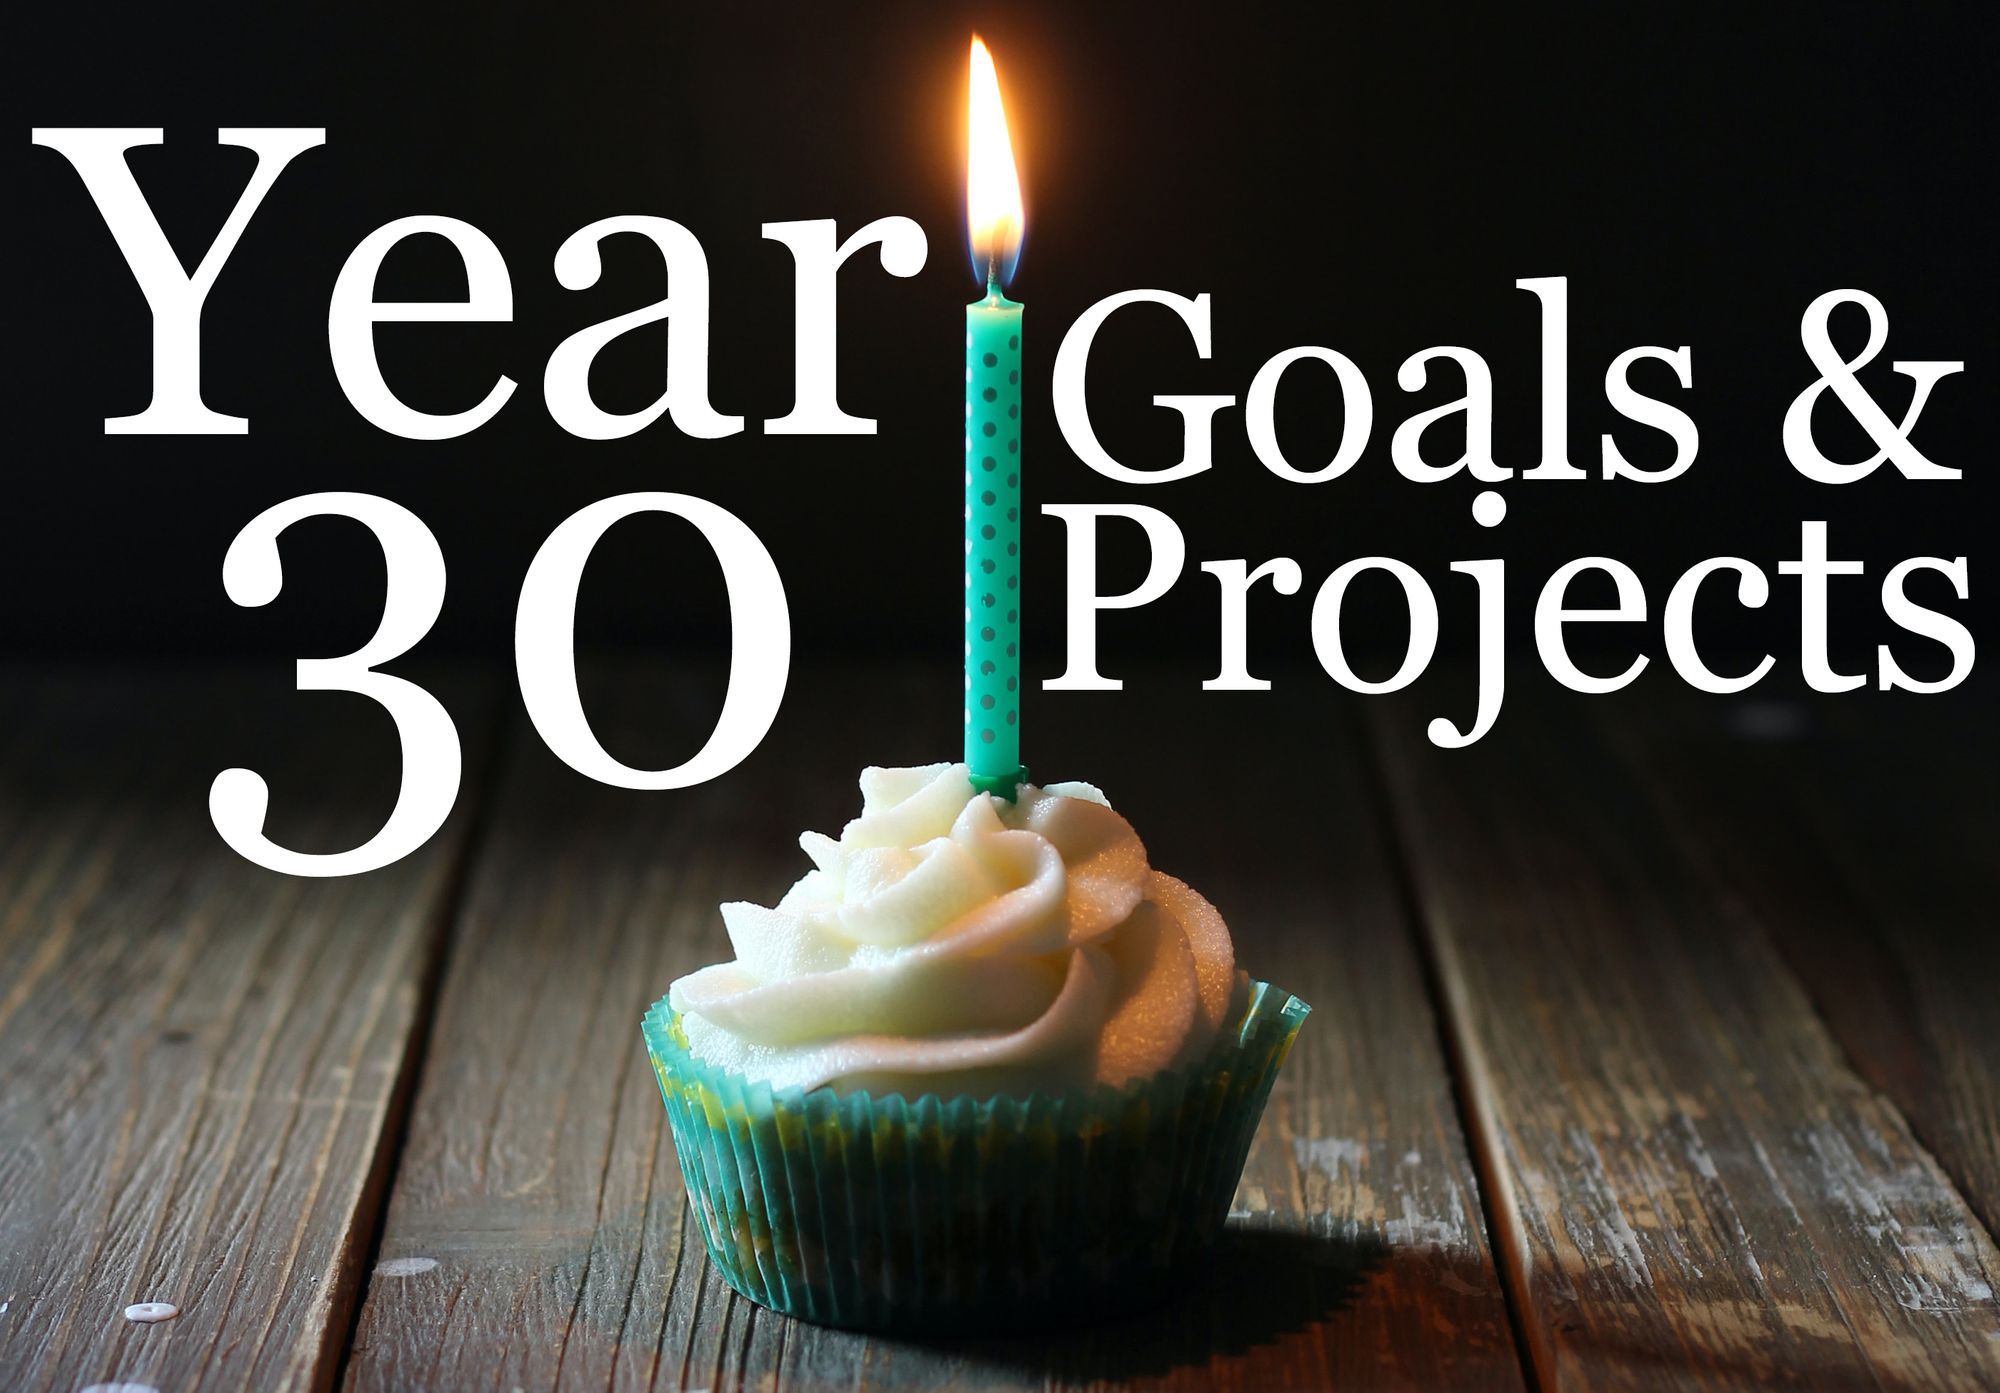 Year 30 // Goals & Projects